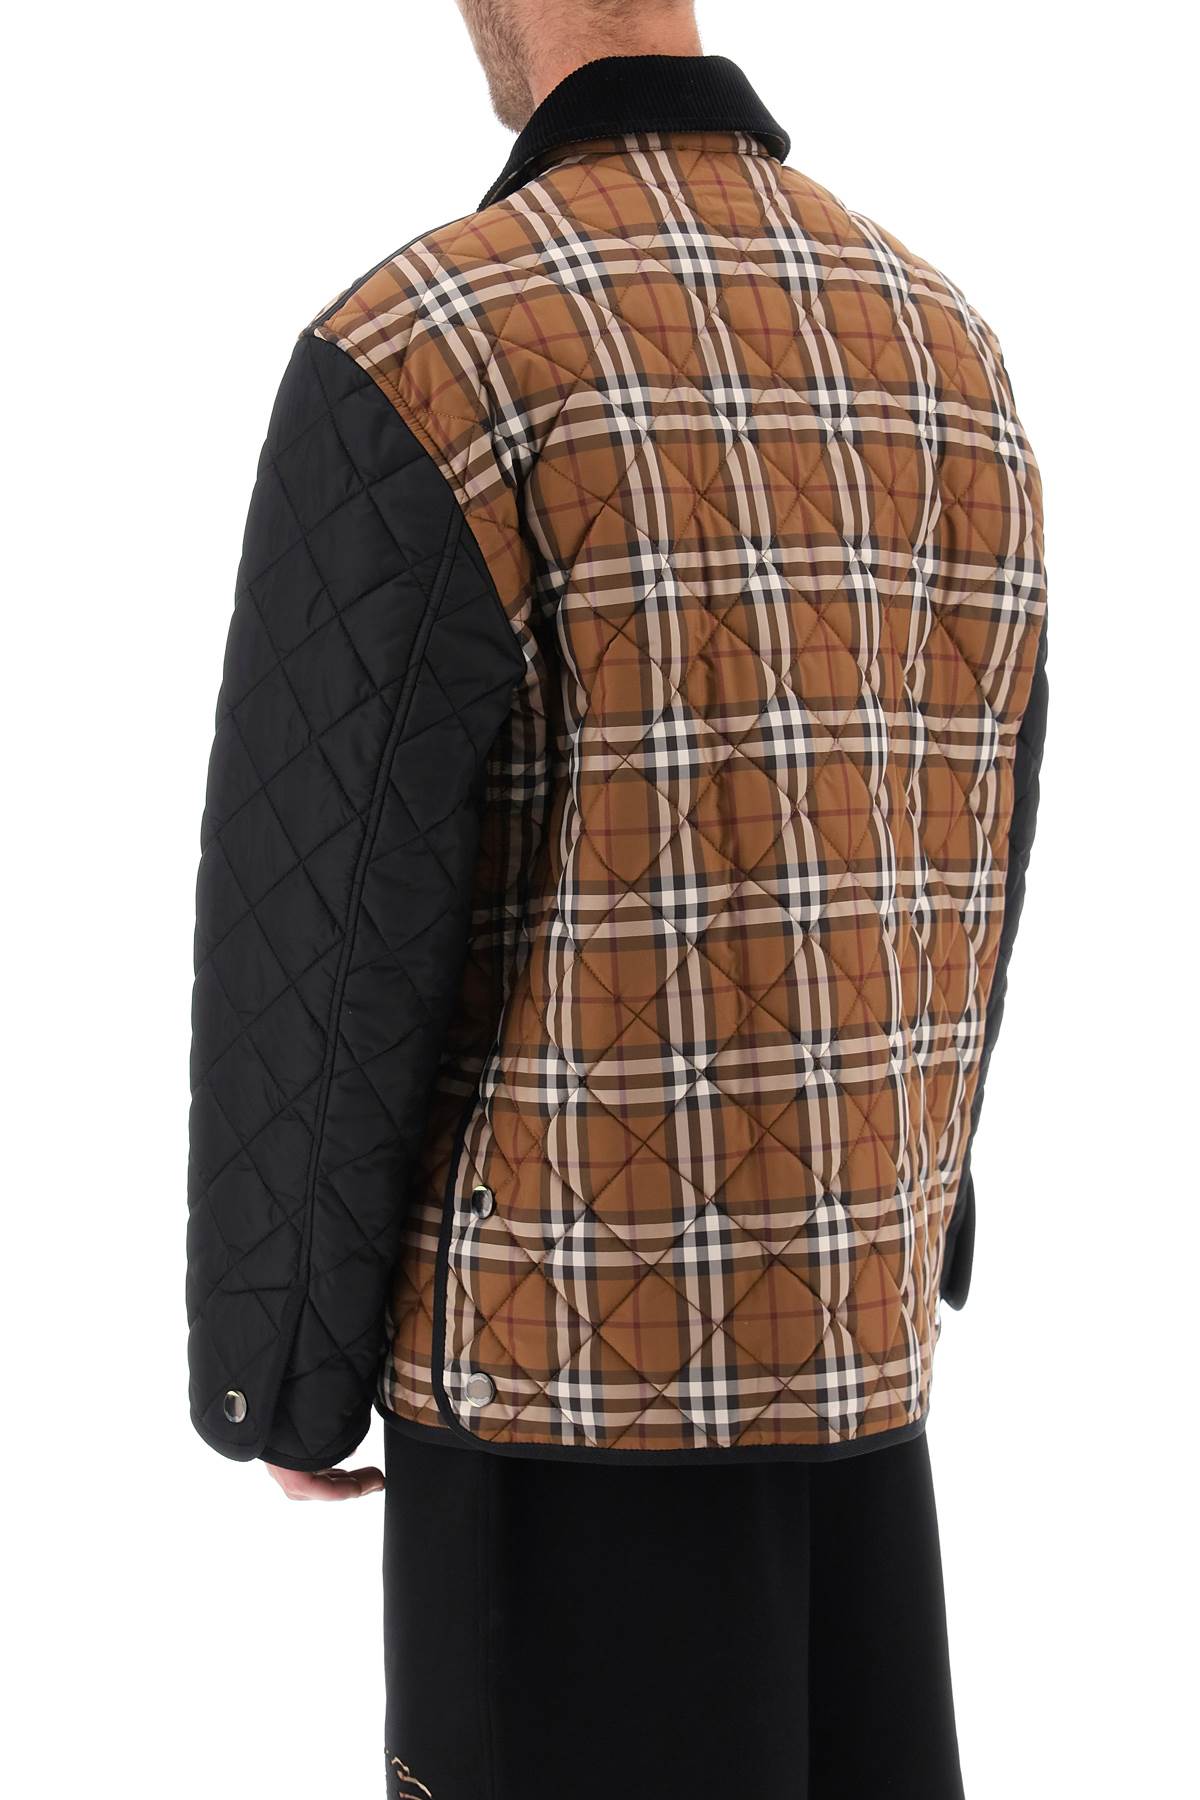 Mixed Colours Quilted Jacket for Men with Burberry Check Panels and Corduroy Collar